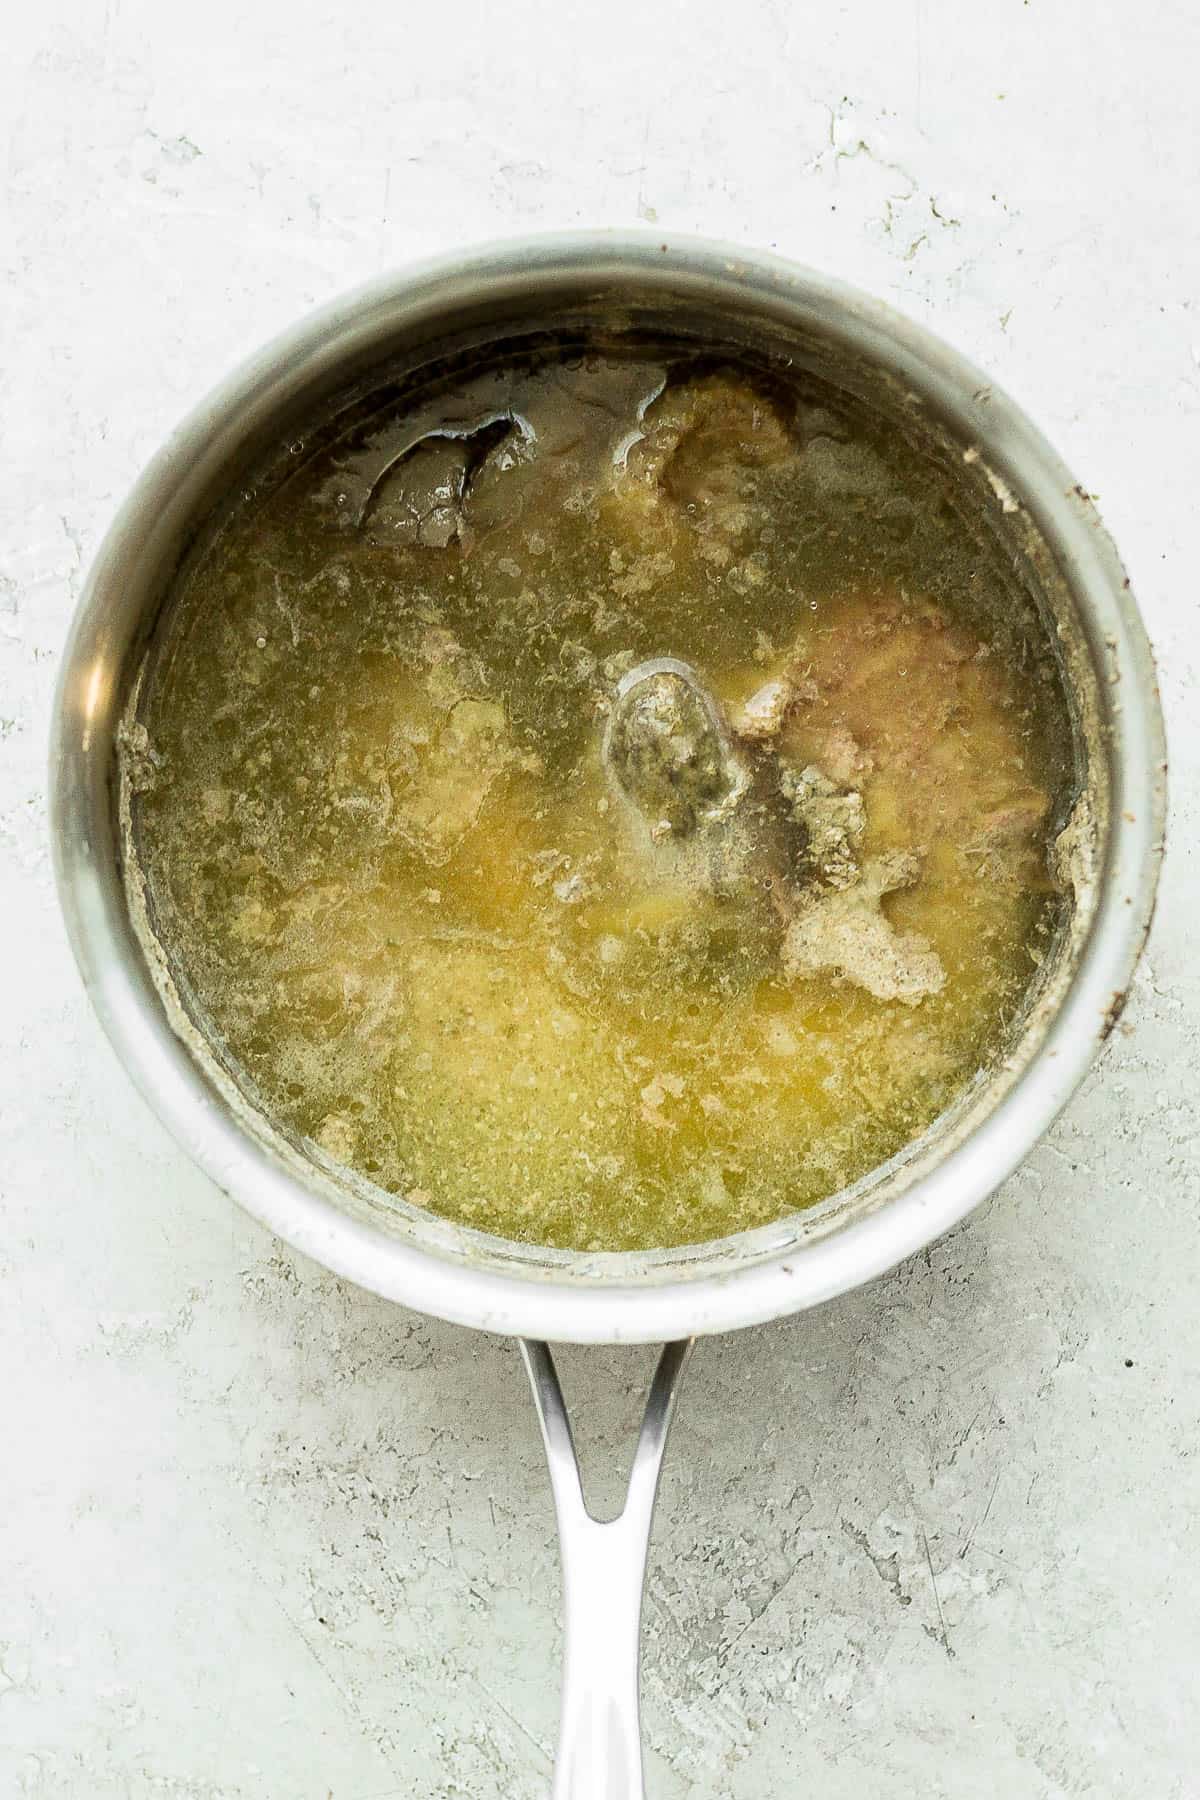 Fully cooked turkey giblets in a saucepan with water.